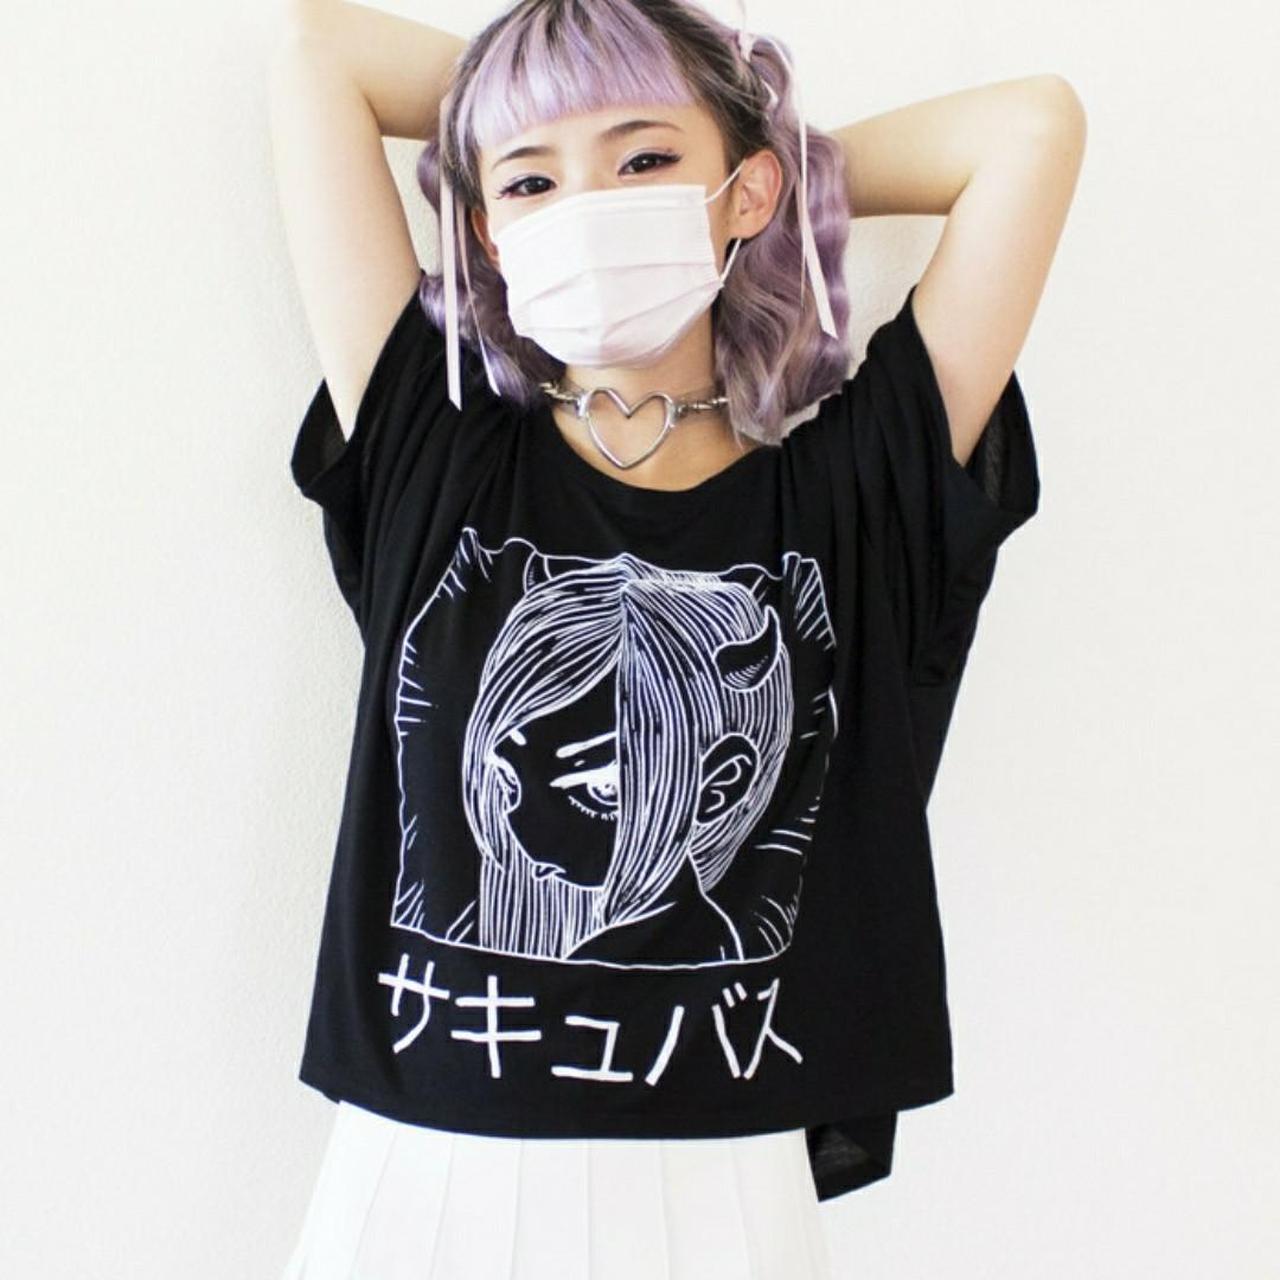 Product Image 3 - OMOCAT Succubus Boxy Crop-Top
[Deadstock shirt